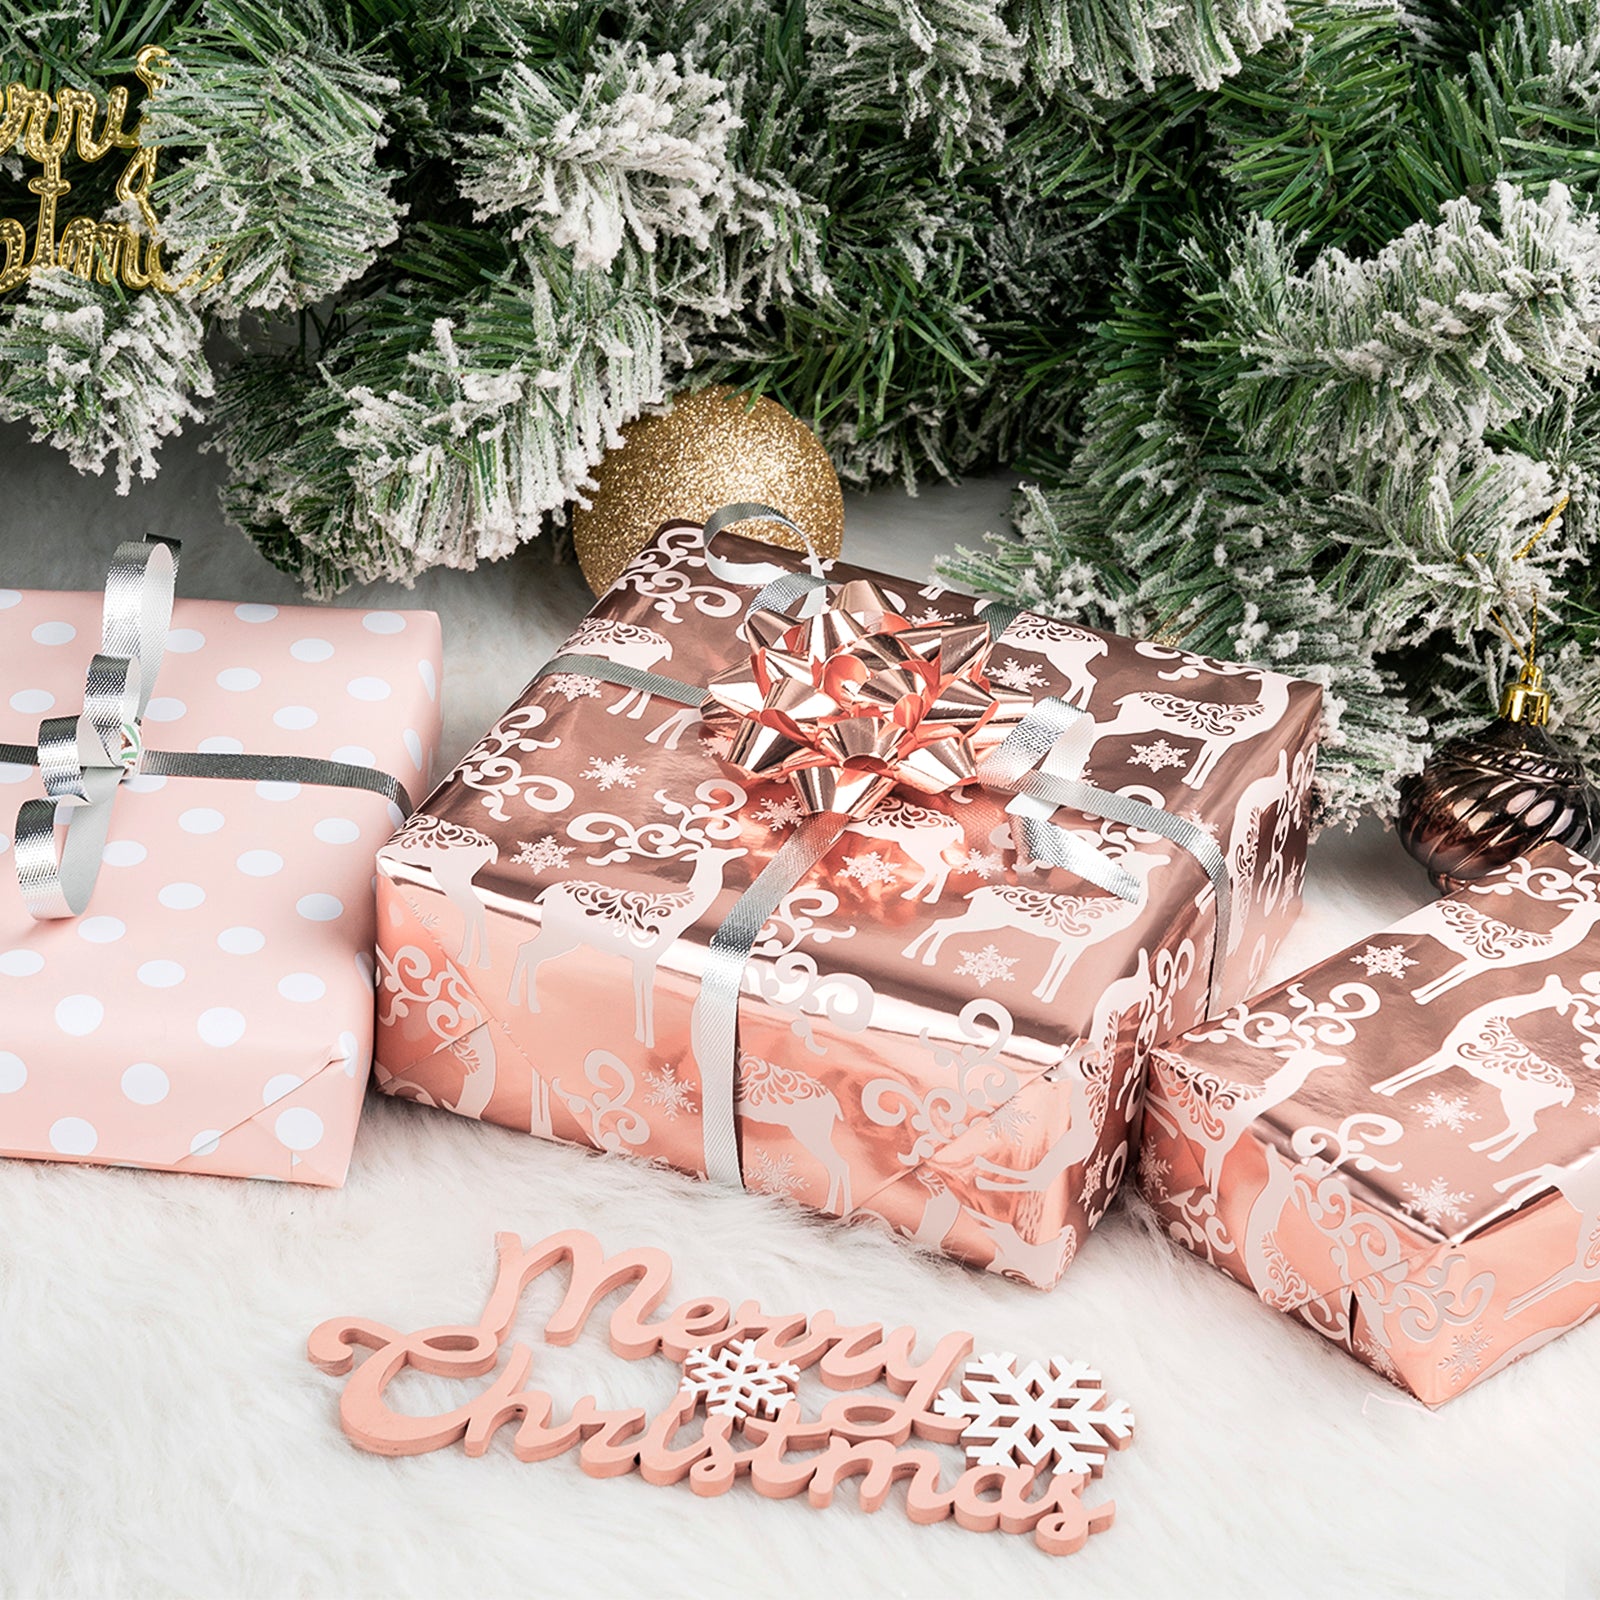 Rose Gold Deer Wrapping Paper Roll with White Polka Dots on Reverse Wholesale Wrapholic